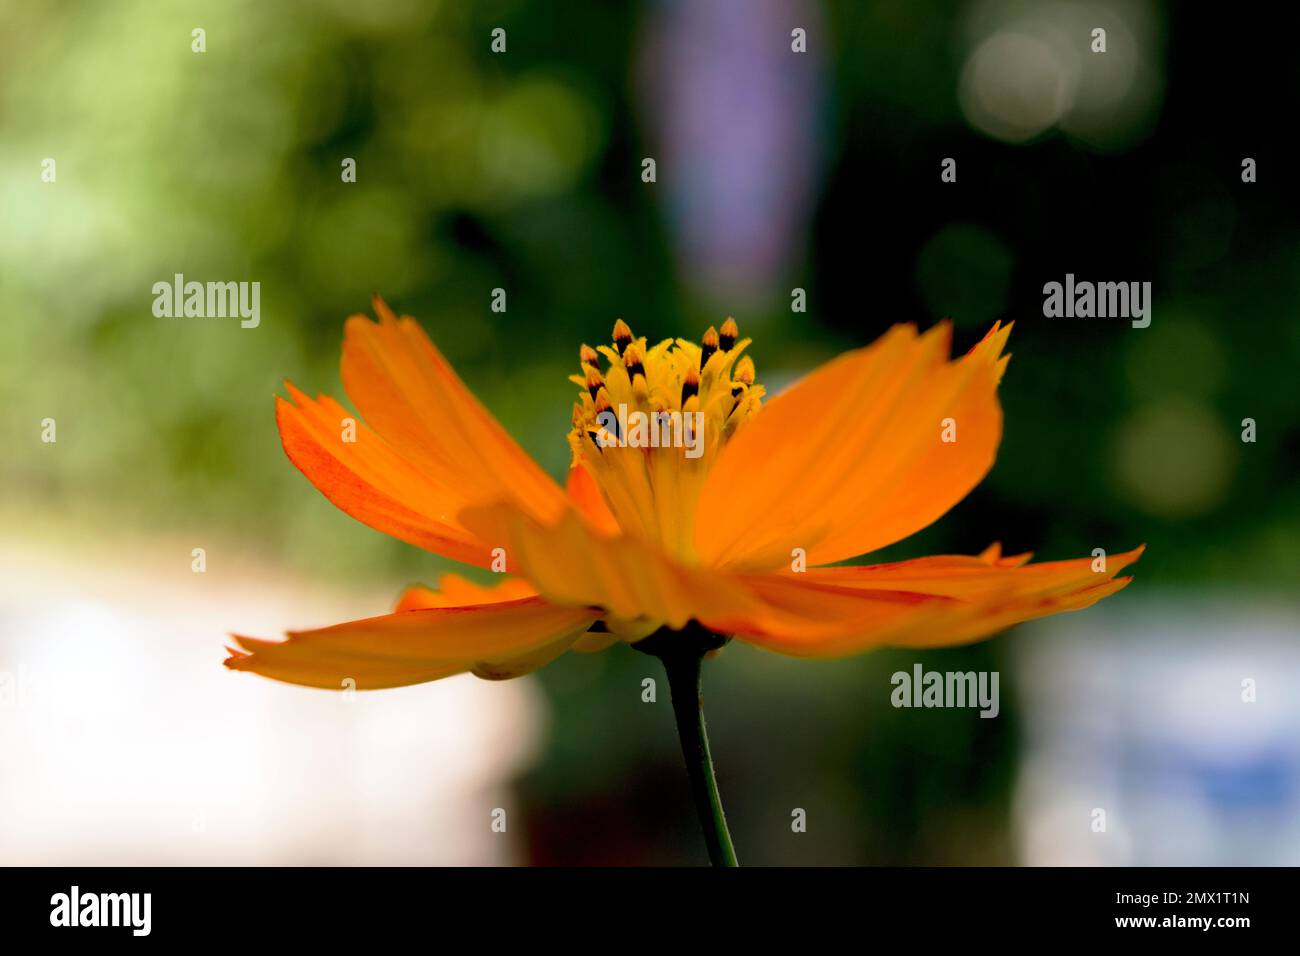 Beautiful orange flower profile, in close up photograph. Sulfur cosmos is an ornamental plant of the daisy family attracting bees and butterflies. Stock Photo